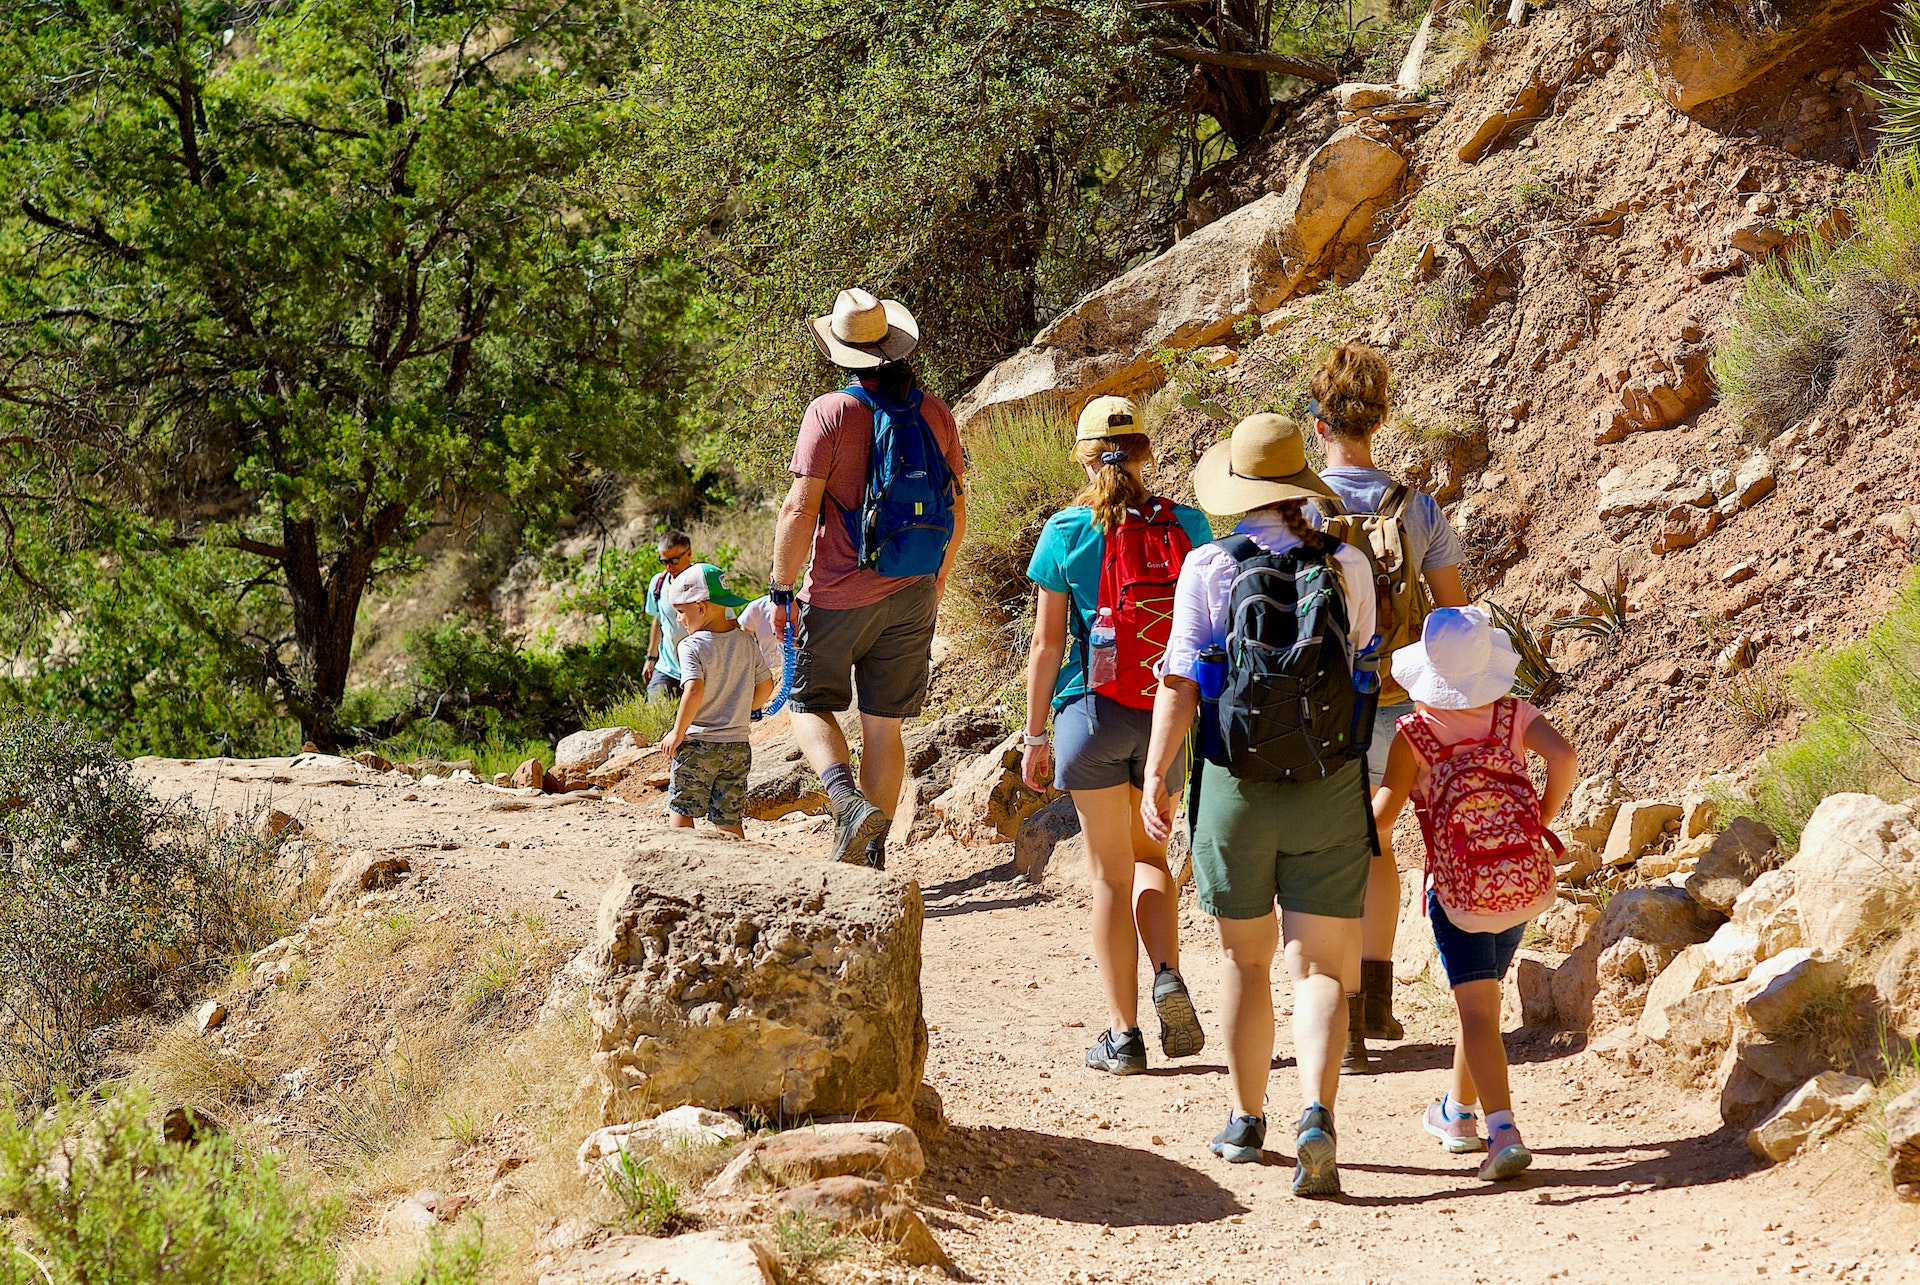 Visitors to Grand Canyon National Park hike the Bright Angel Trail near the South Rim of the Grand Canyon on an excessively hot day